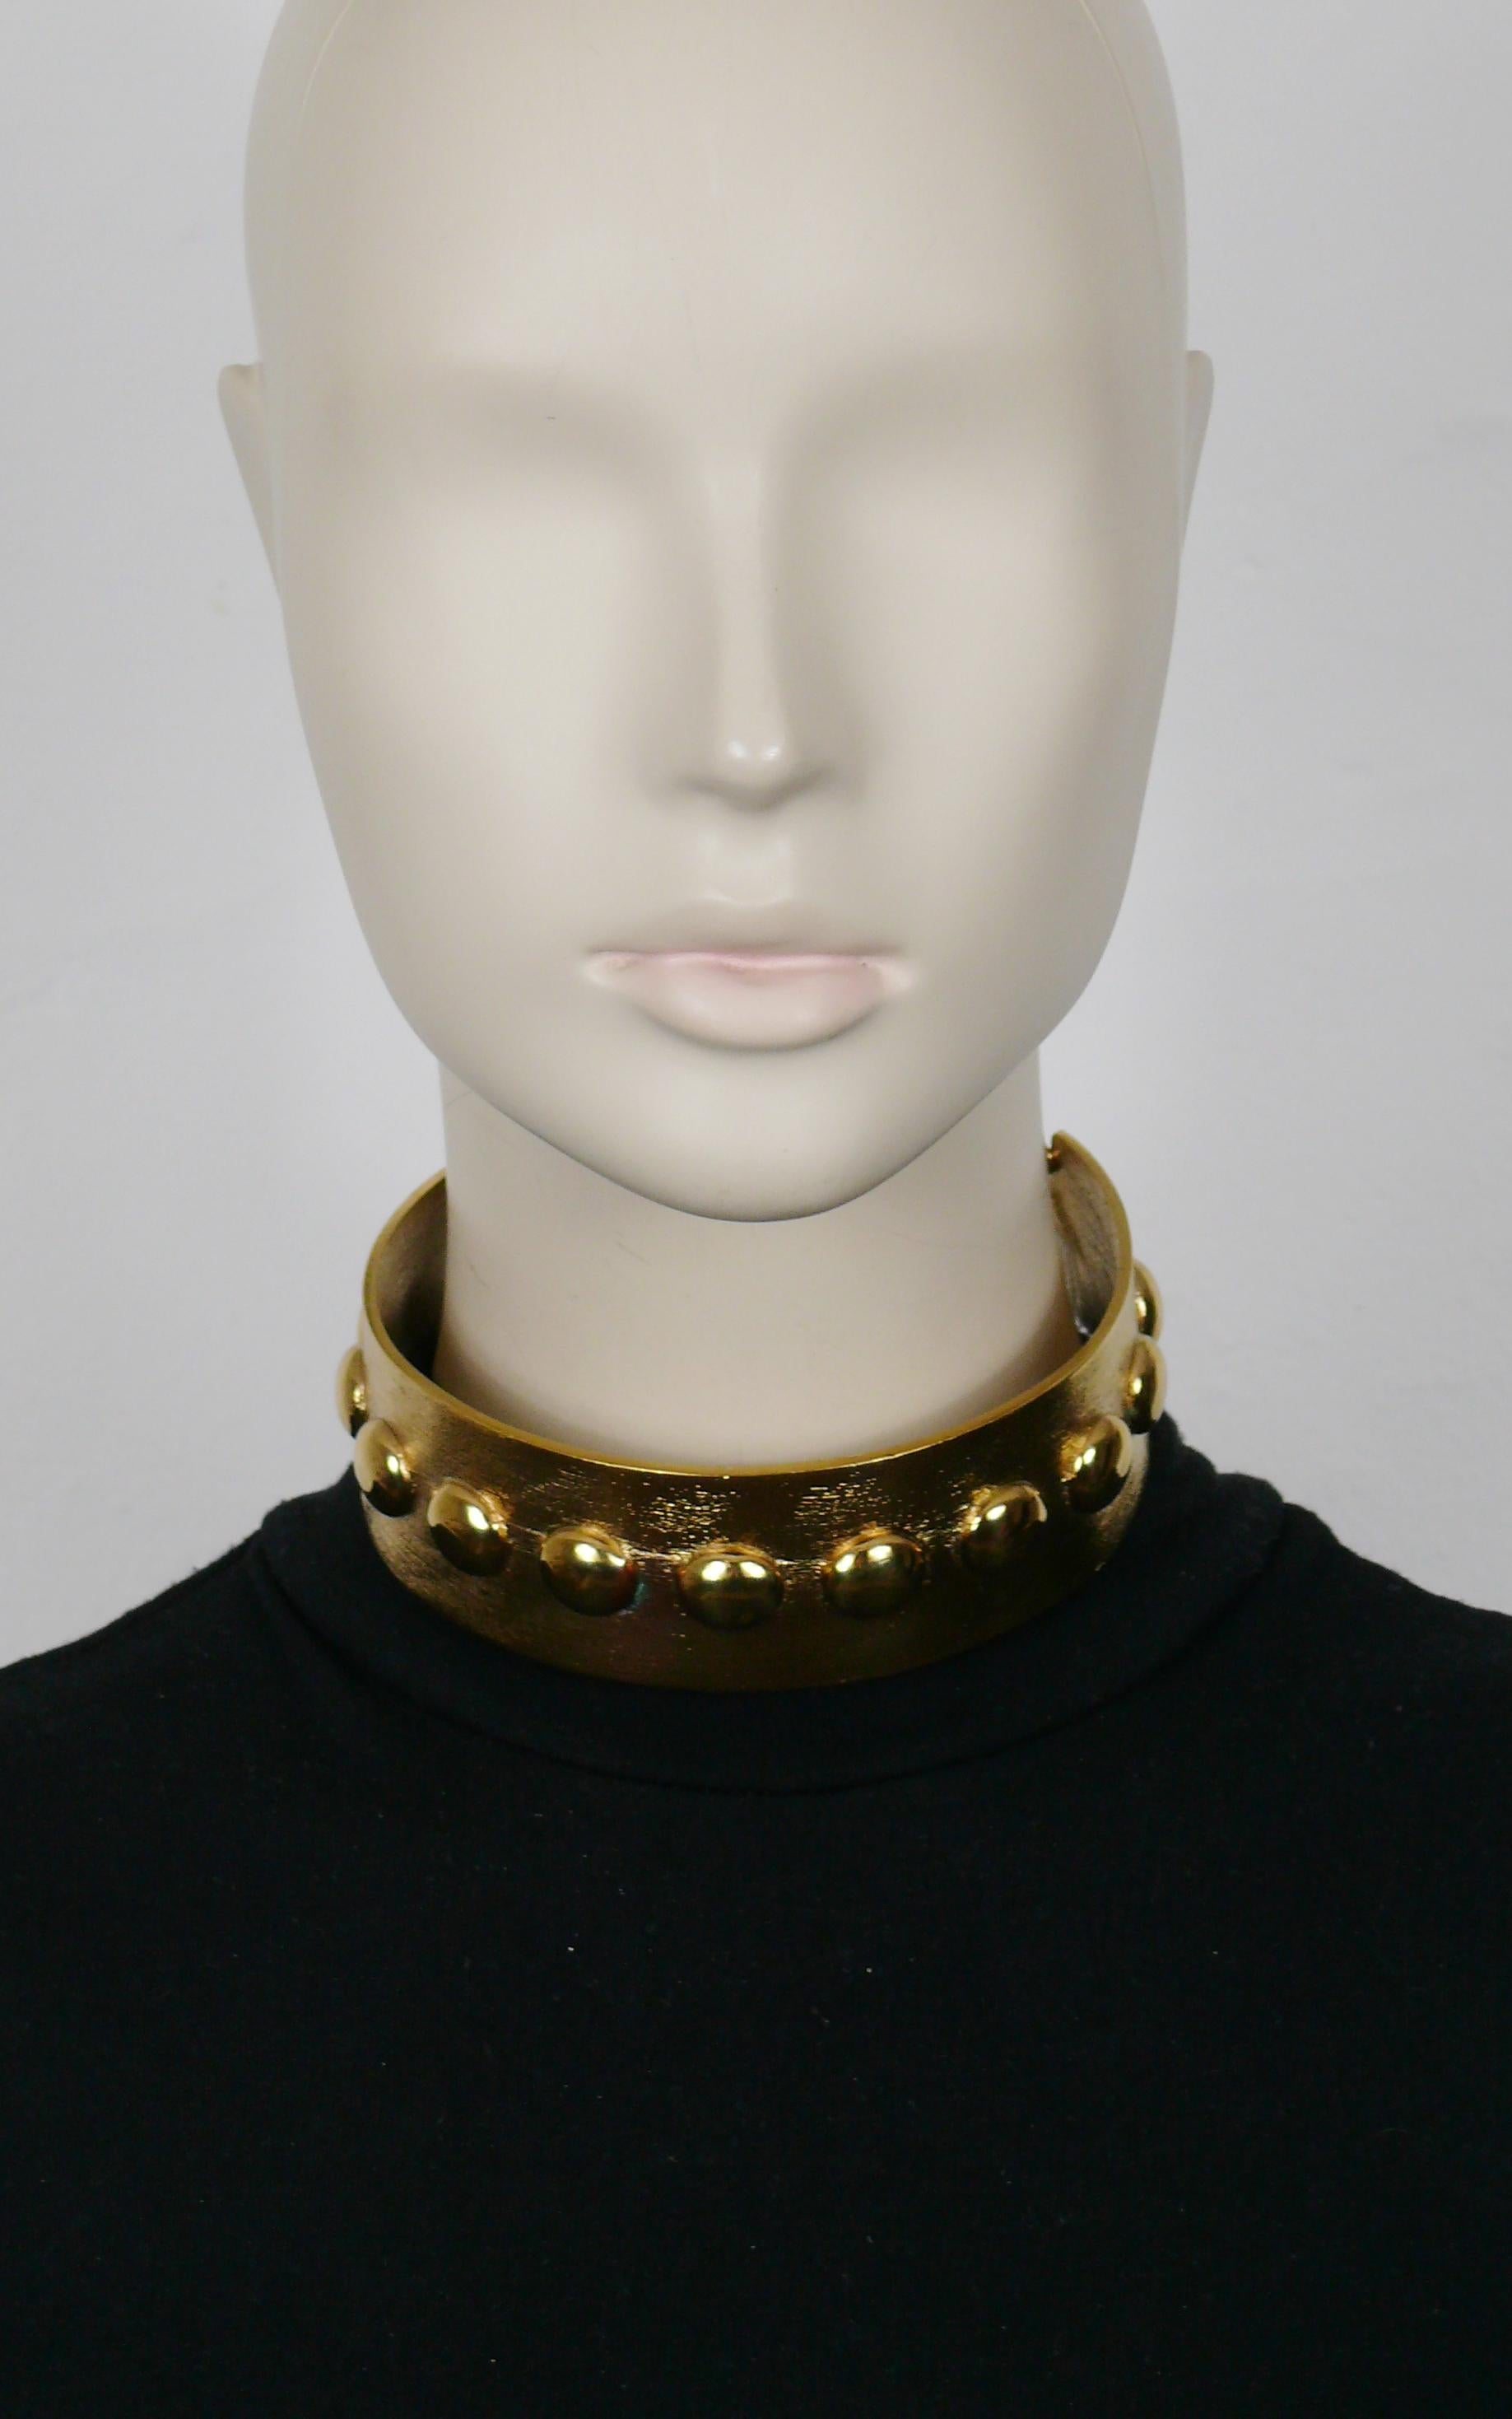 THIERRY MUGLER vintage textured gold tone choker necklace embellished with domes.

Comes from a French private THIERRY MUGLER jewelry collection.

Lobster clasp closure.

Metal tag embossed TM.

Indicative measurements : min. inner circuference